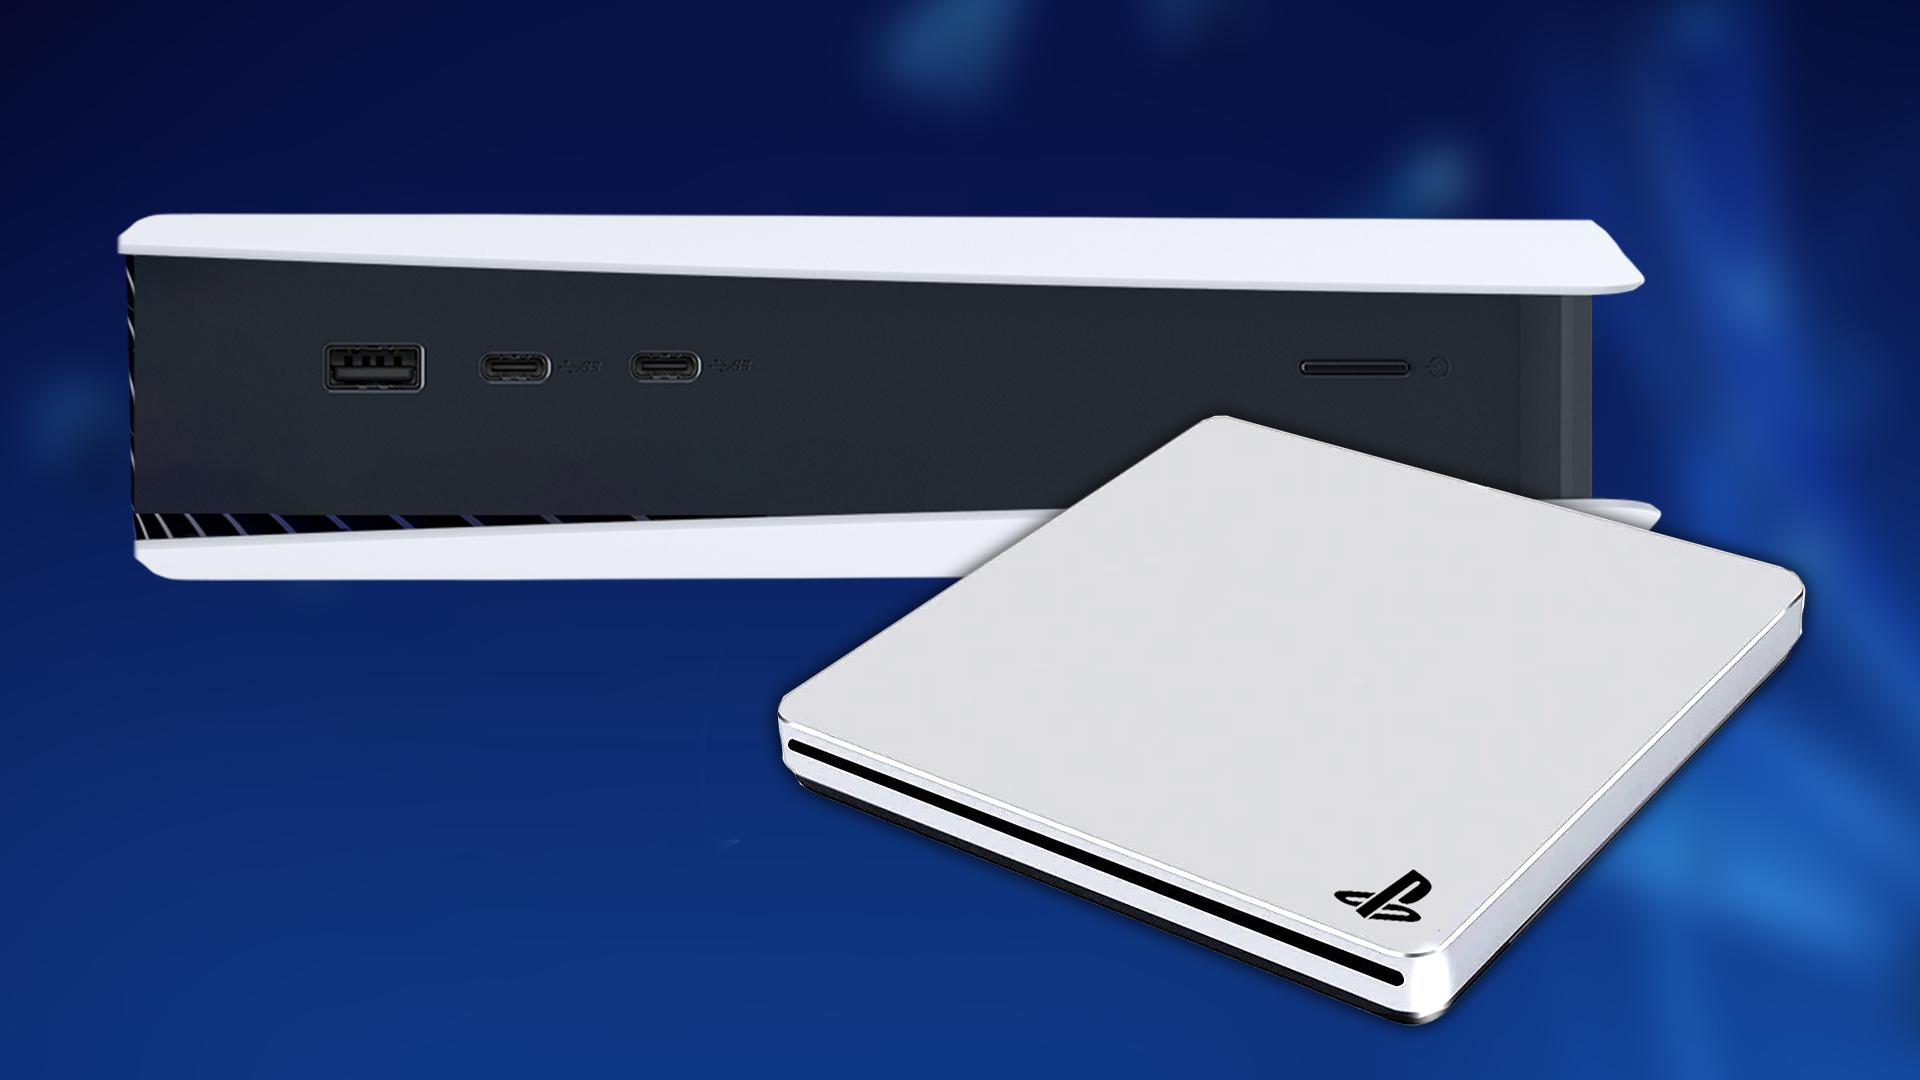 Fake mockup of the new PS5 and disc drive